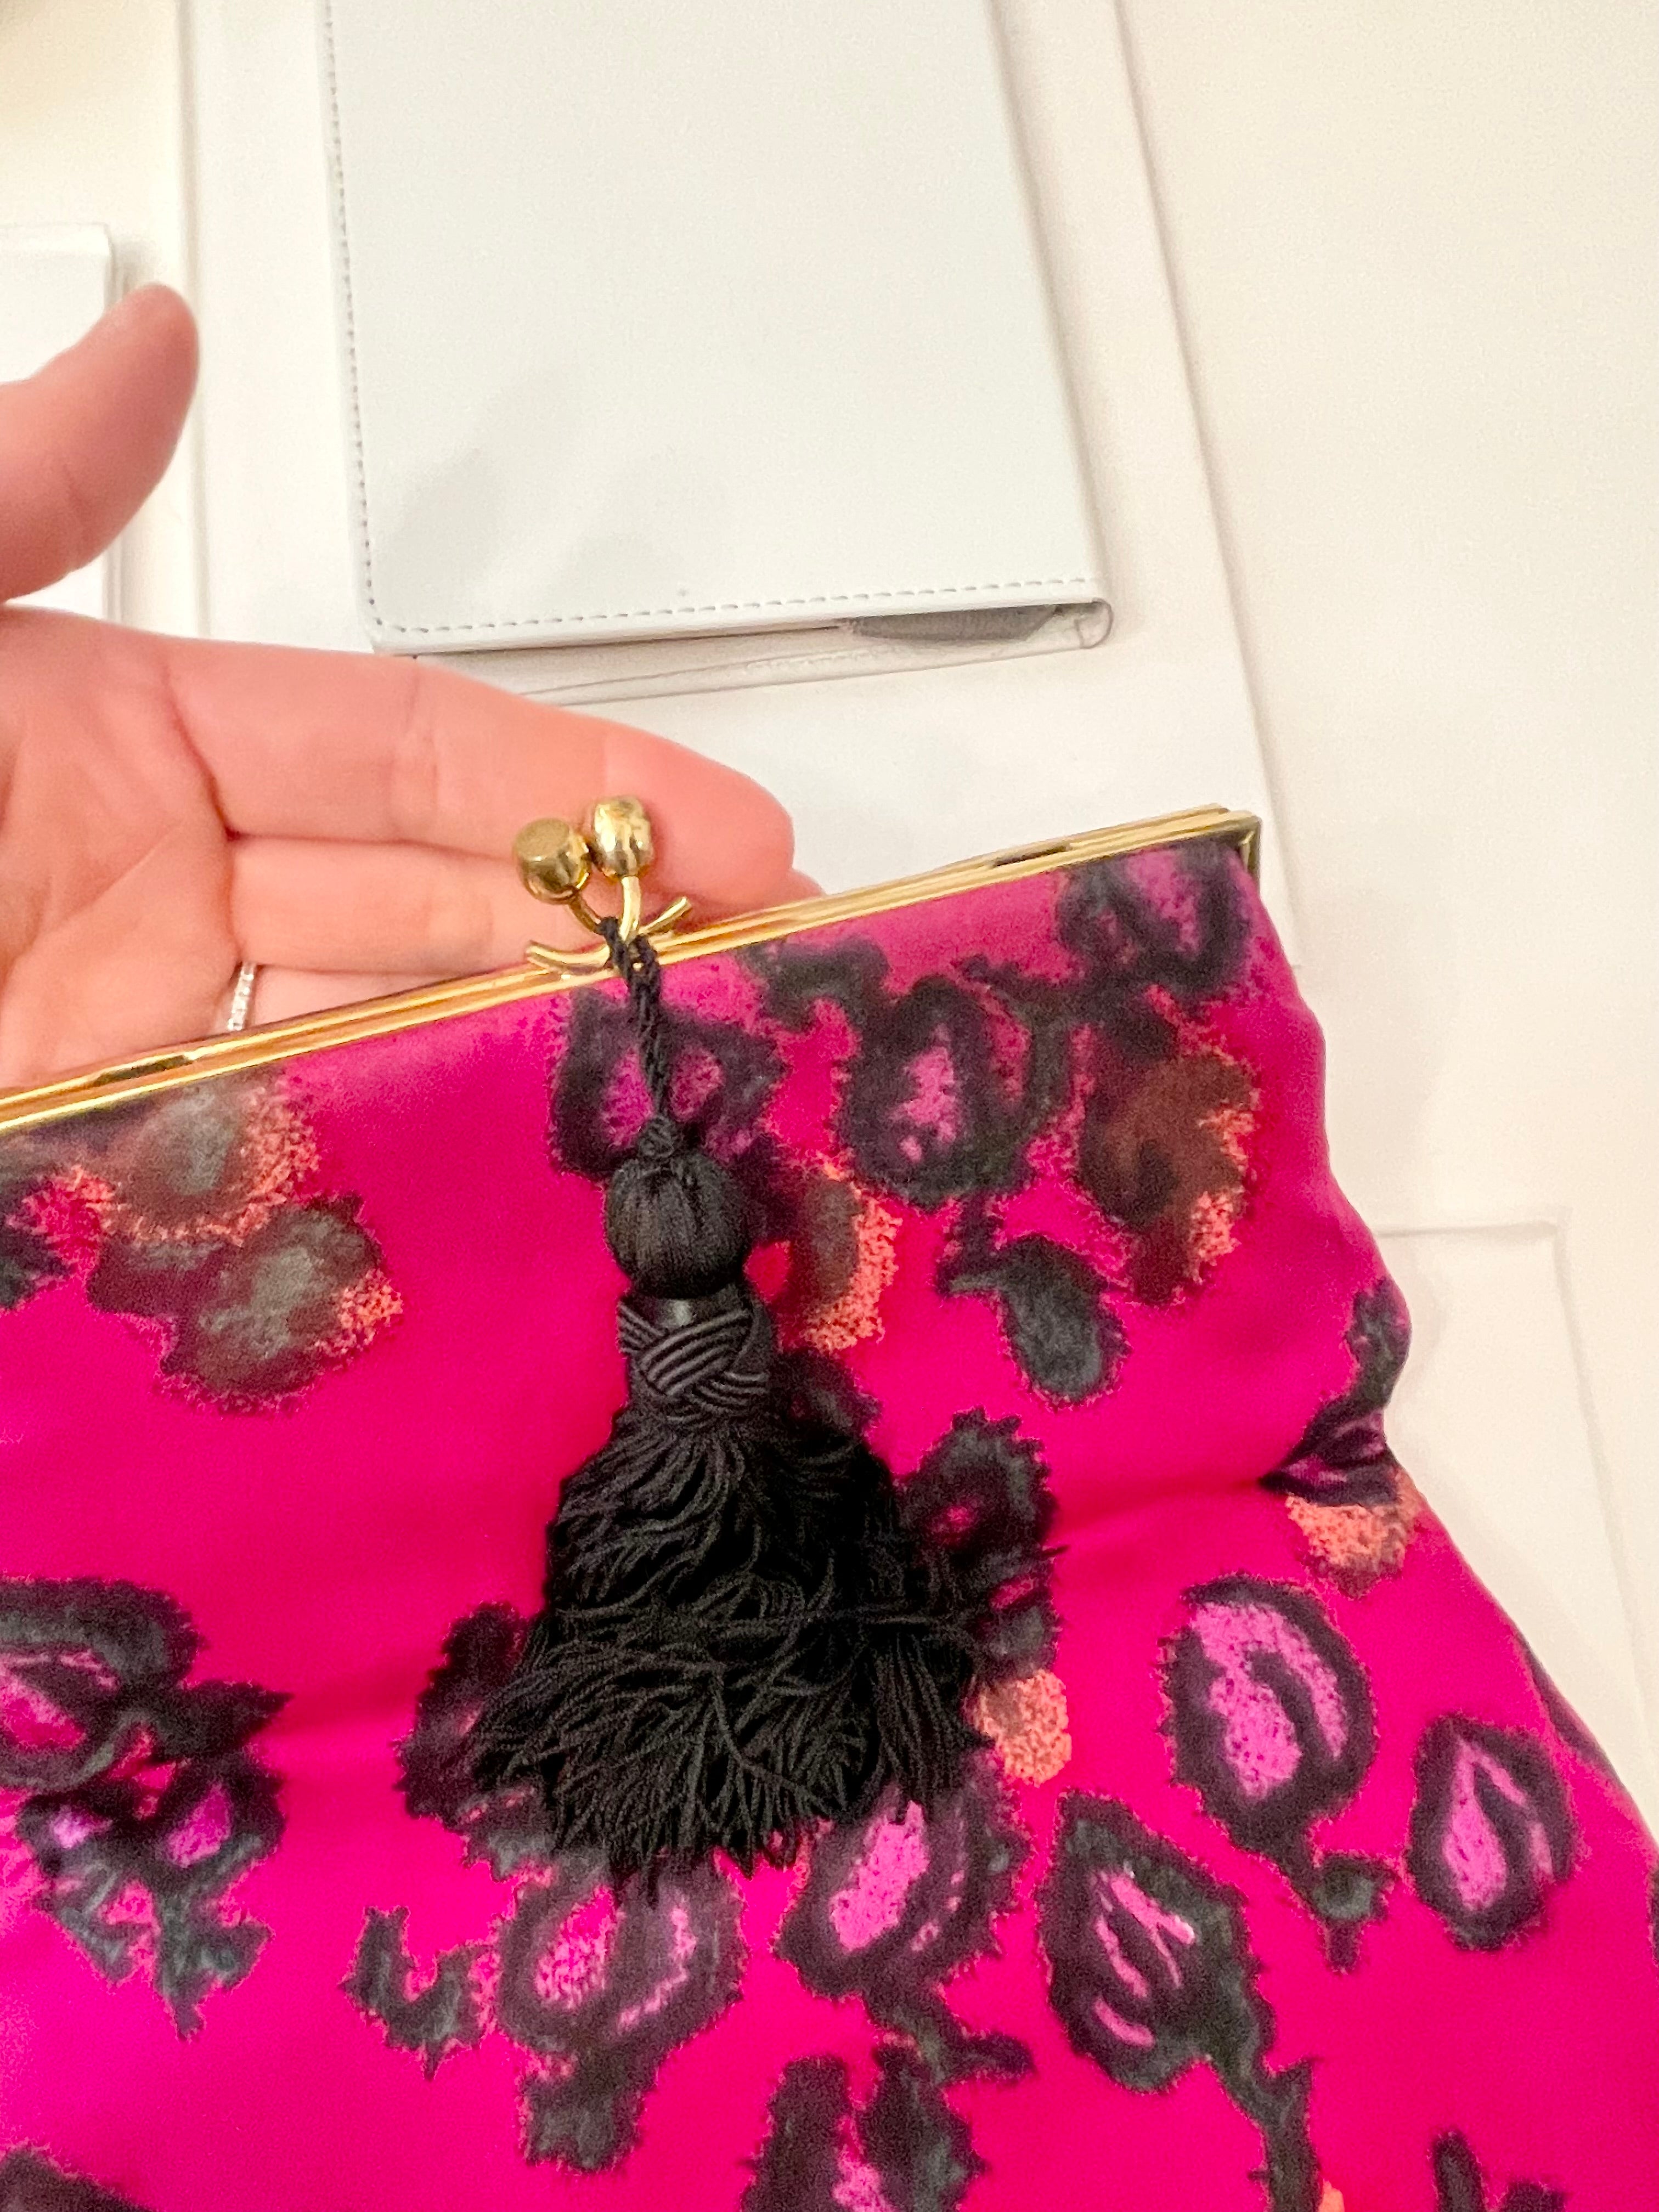 Flirty Gal loves anything pink! this 1960's hot pink floral clutch bag, makes her heart happy!